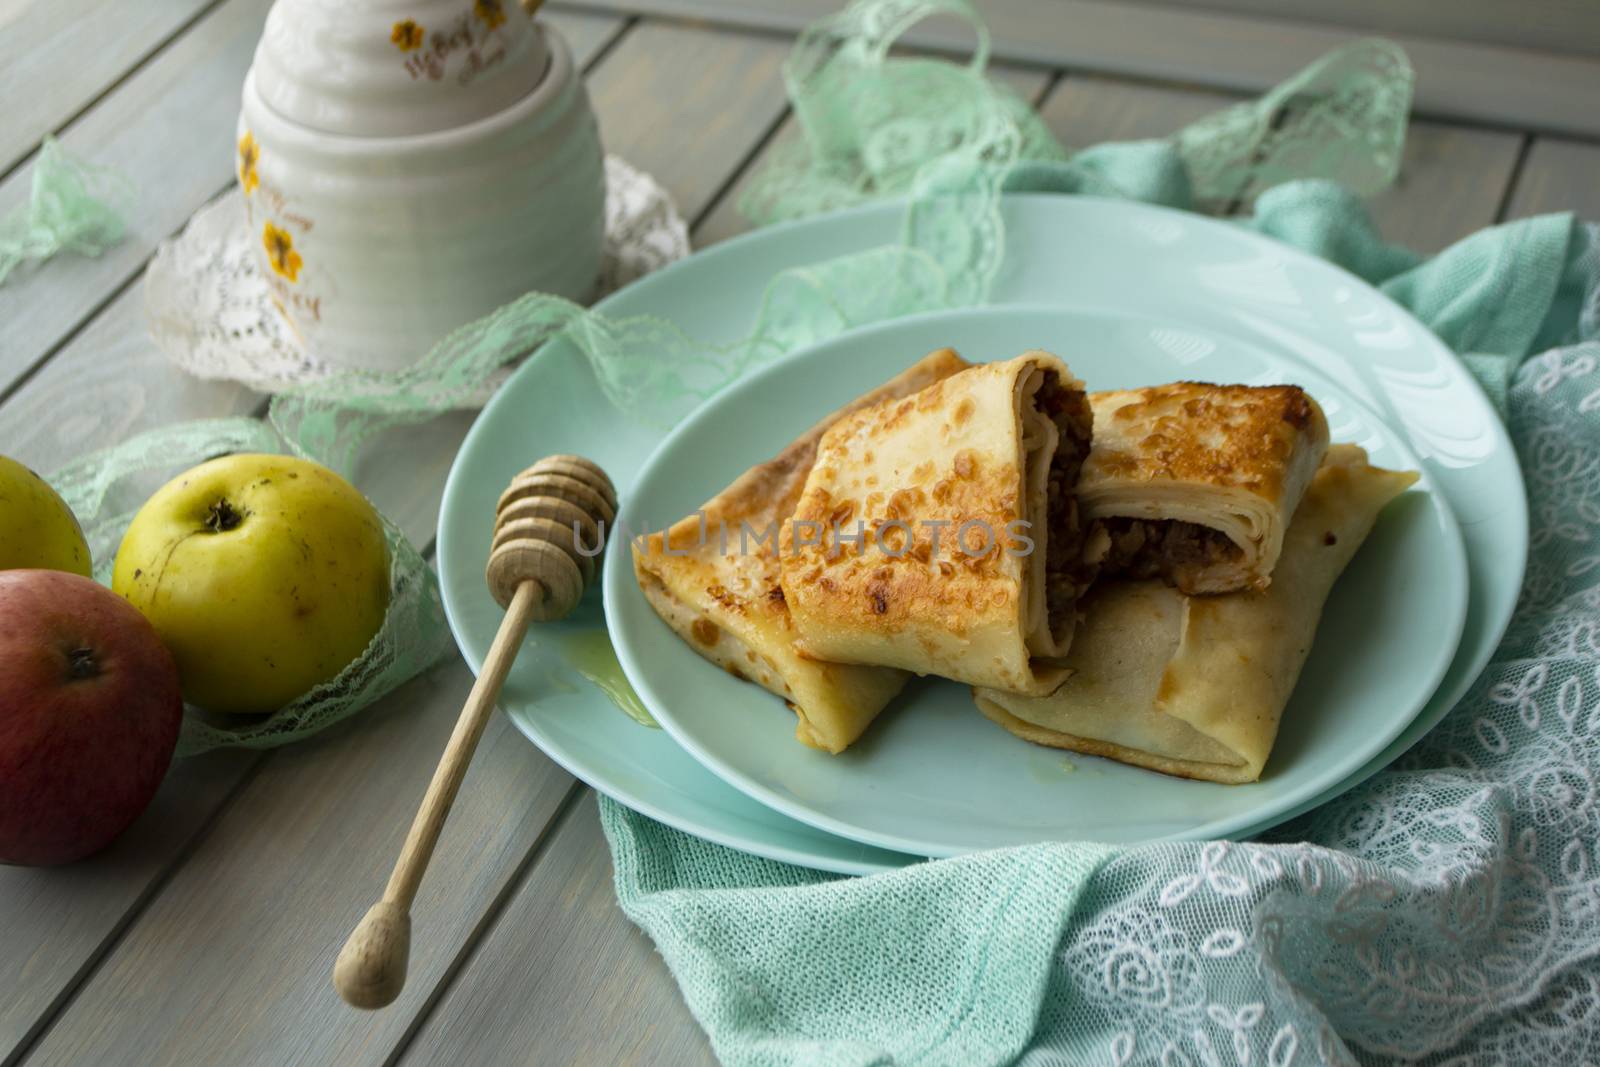 Apple cinnamon crepes. Pancakes with caramelized apples and cinnamon. Teal background